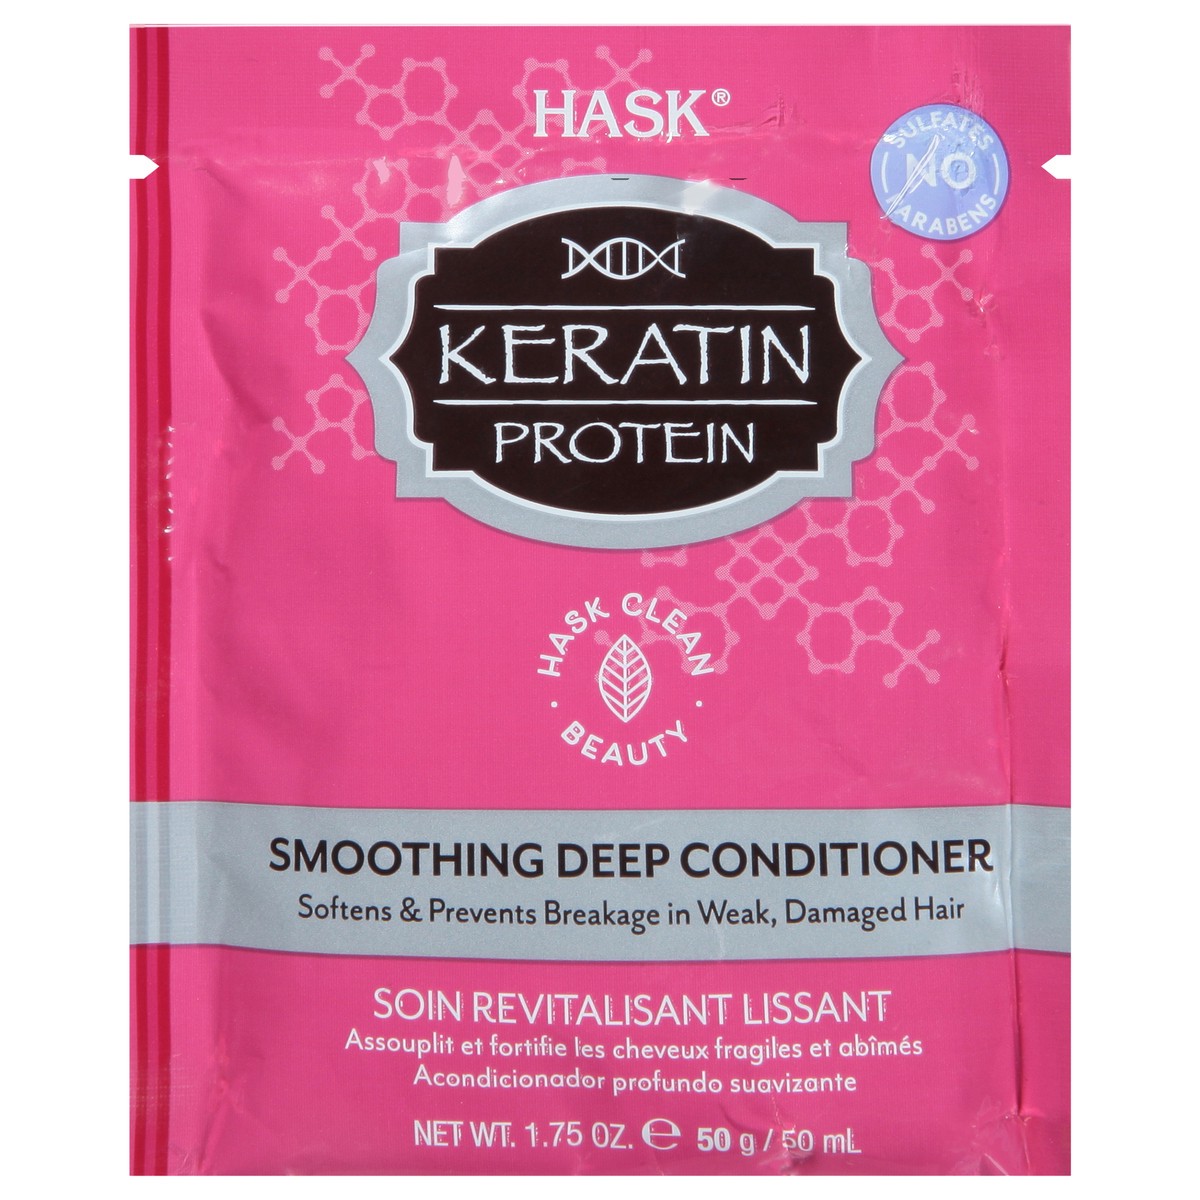 slide 1 of 9, Hask Keratin Protein Smoothing Deep Conditioner 1.75 oz, 1.75 oz